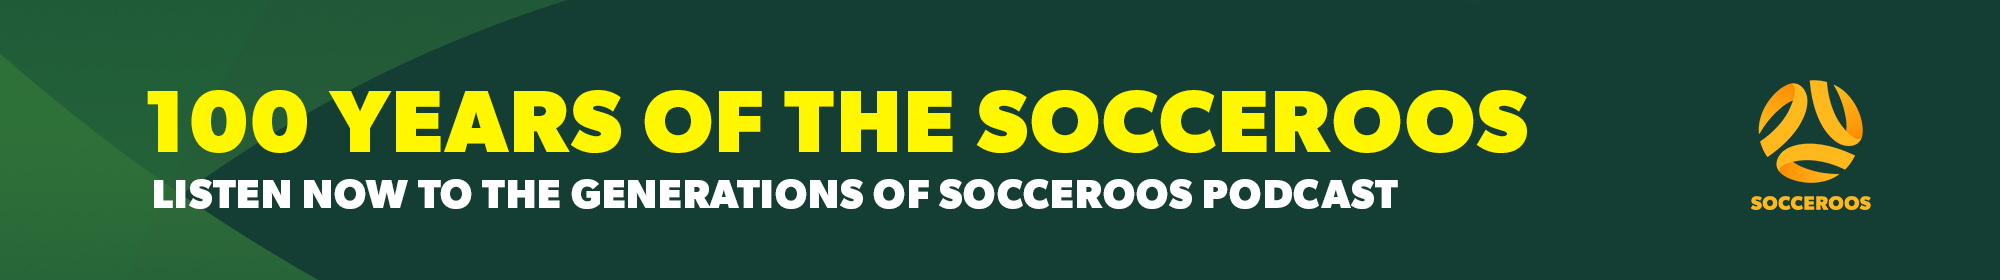 Generations of Socceroos Podcast Thin Banner